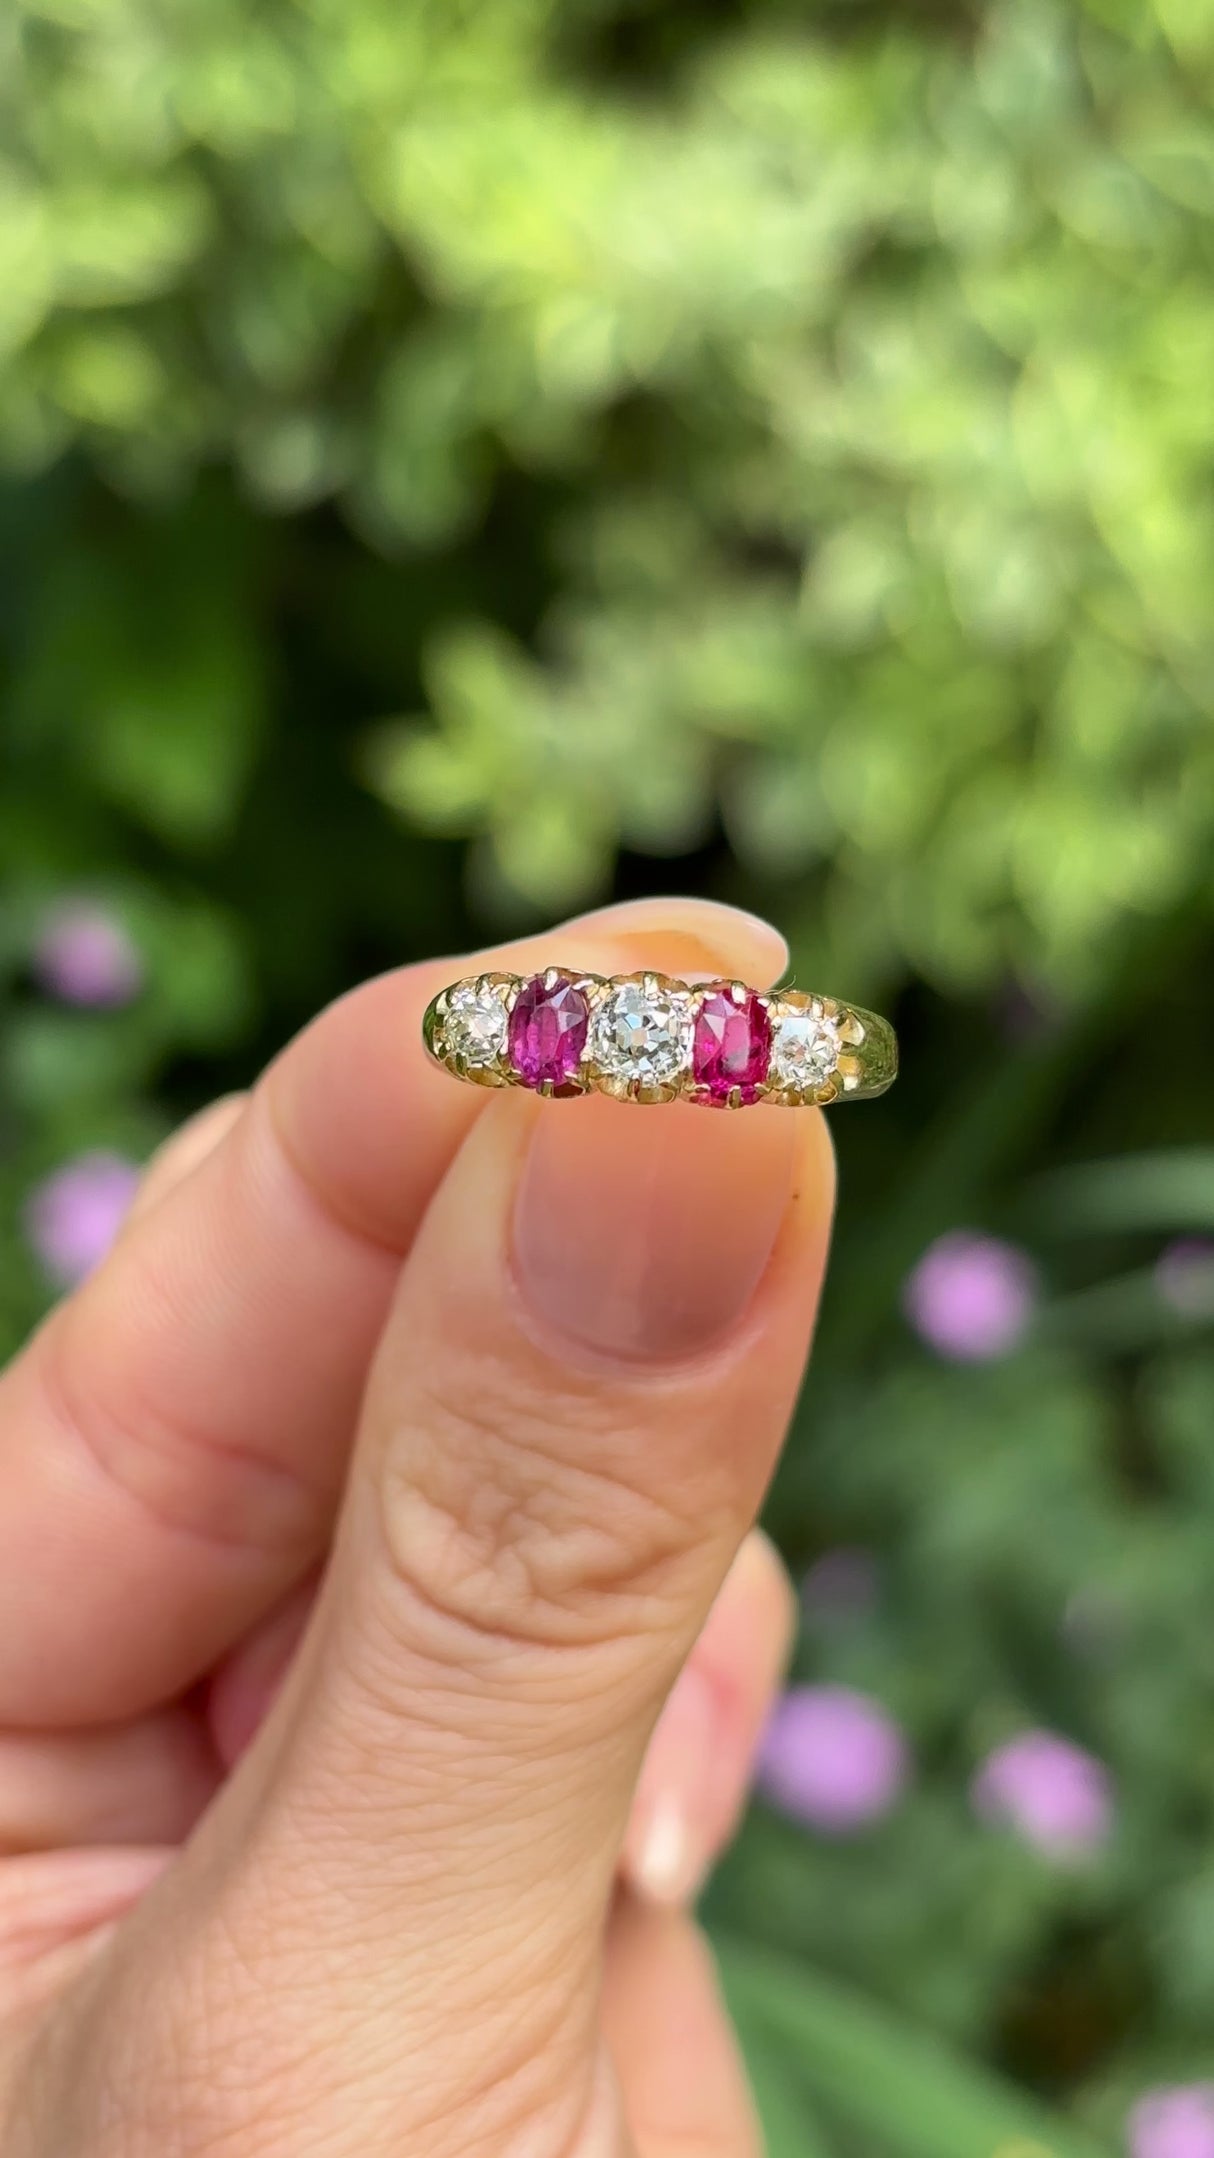 Antique, Victorian ruby & diamond five-stone ring, 18ct yellow gold